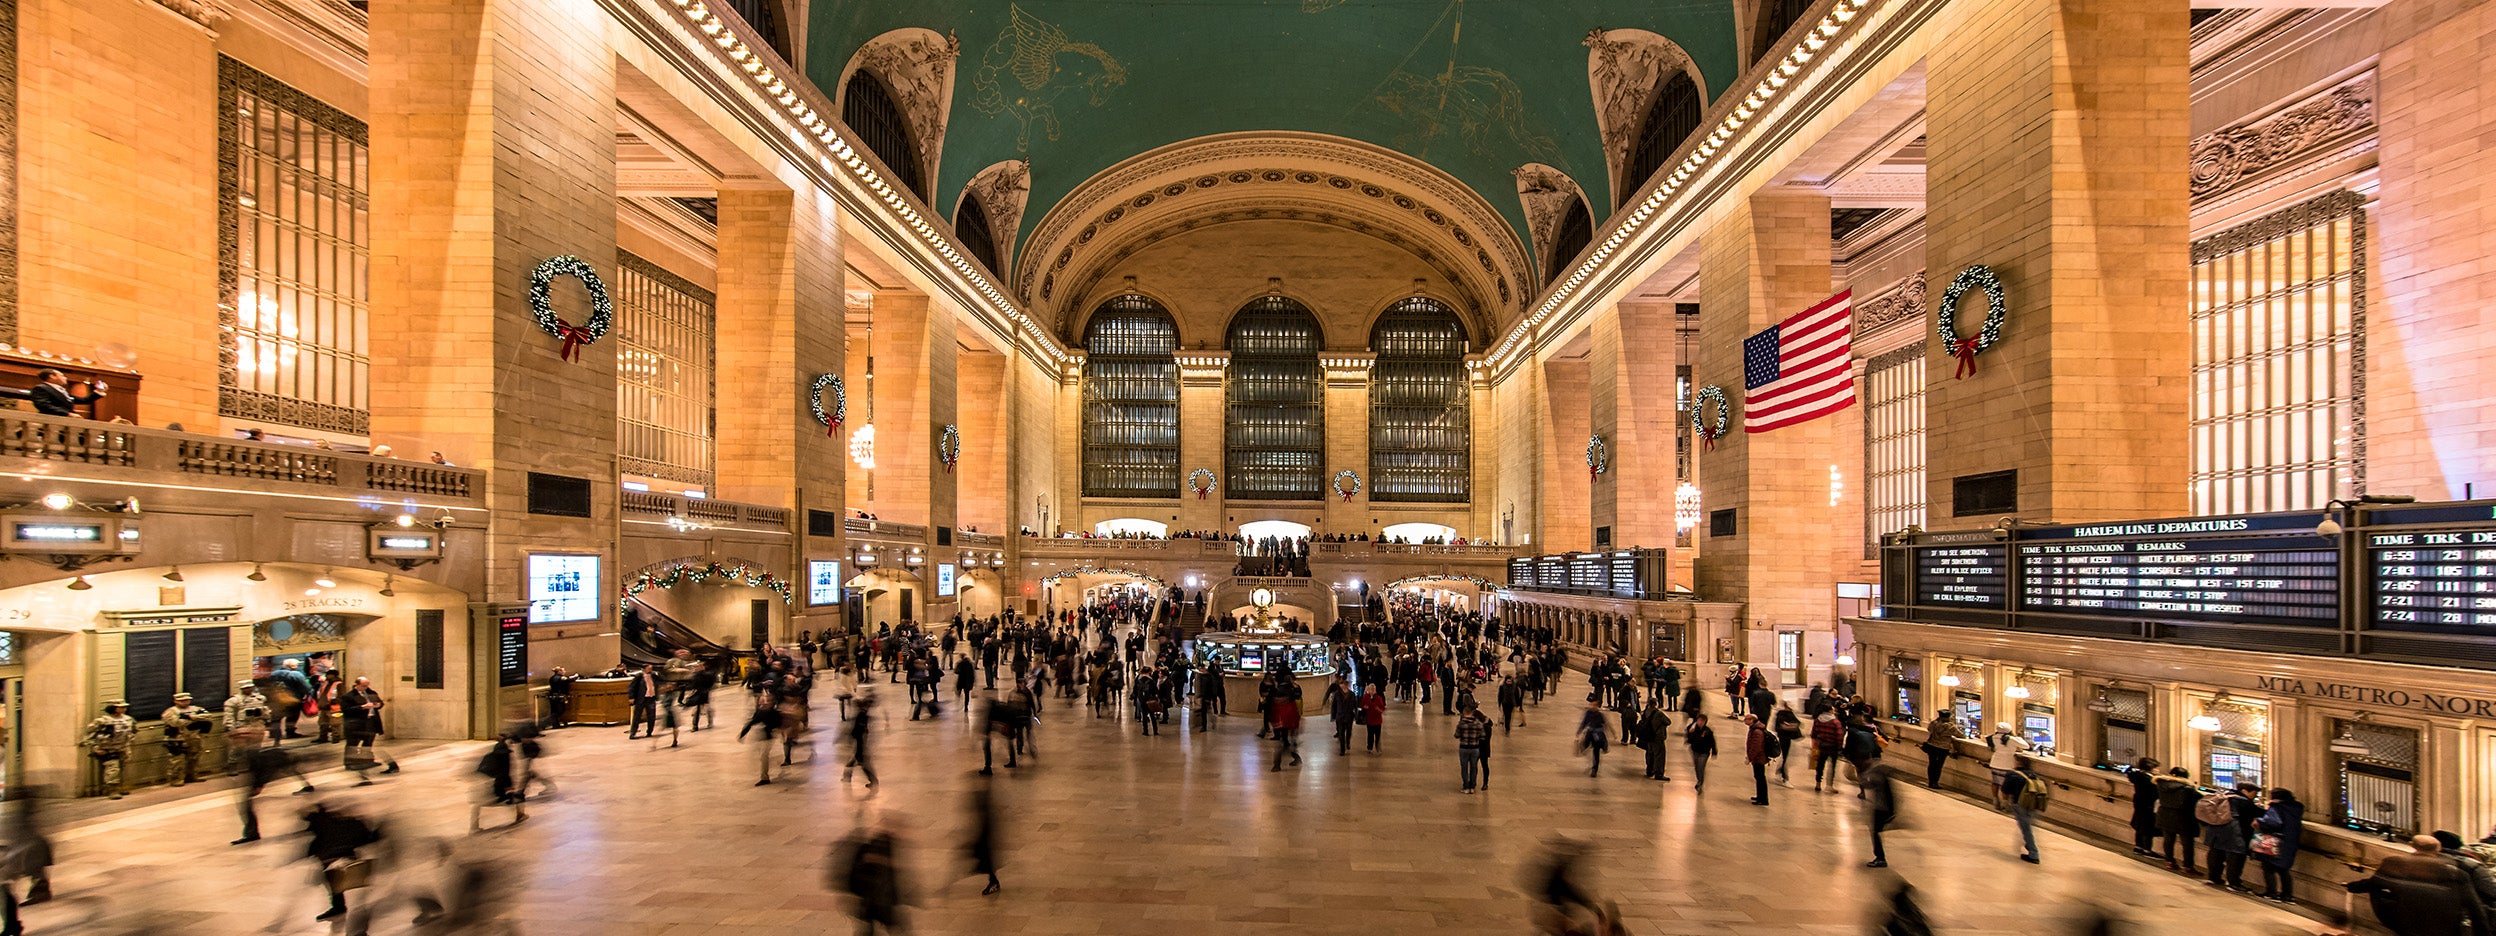 Commuters in Grand Central Station New York